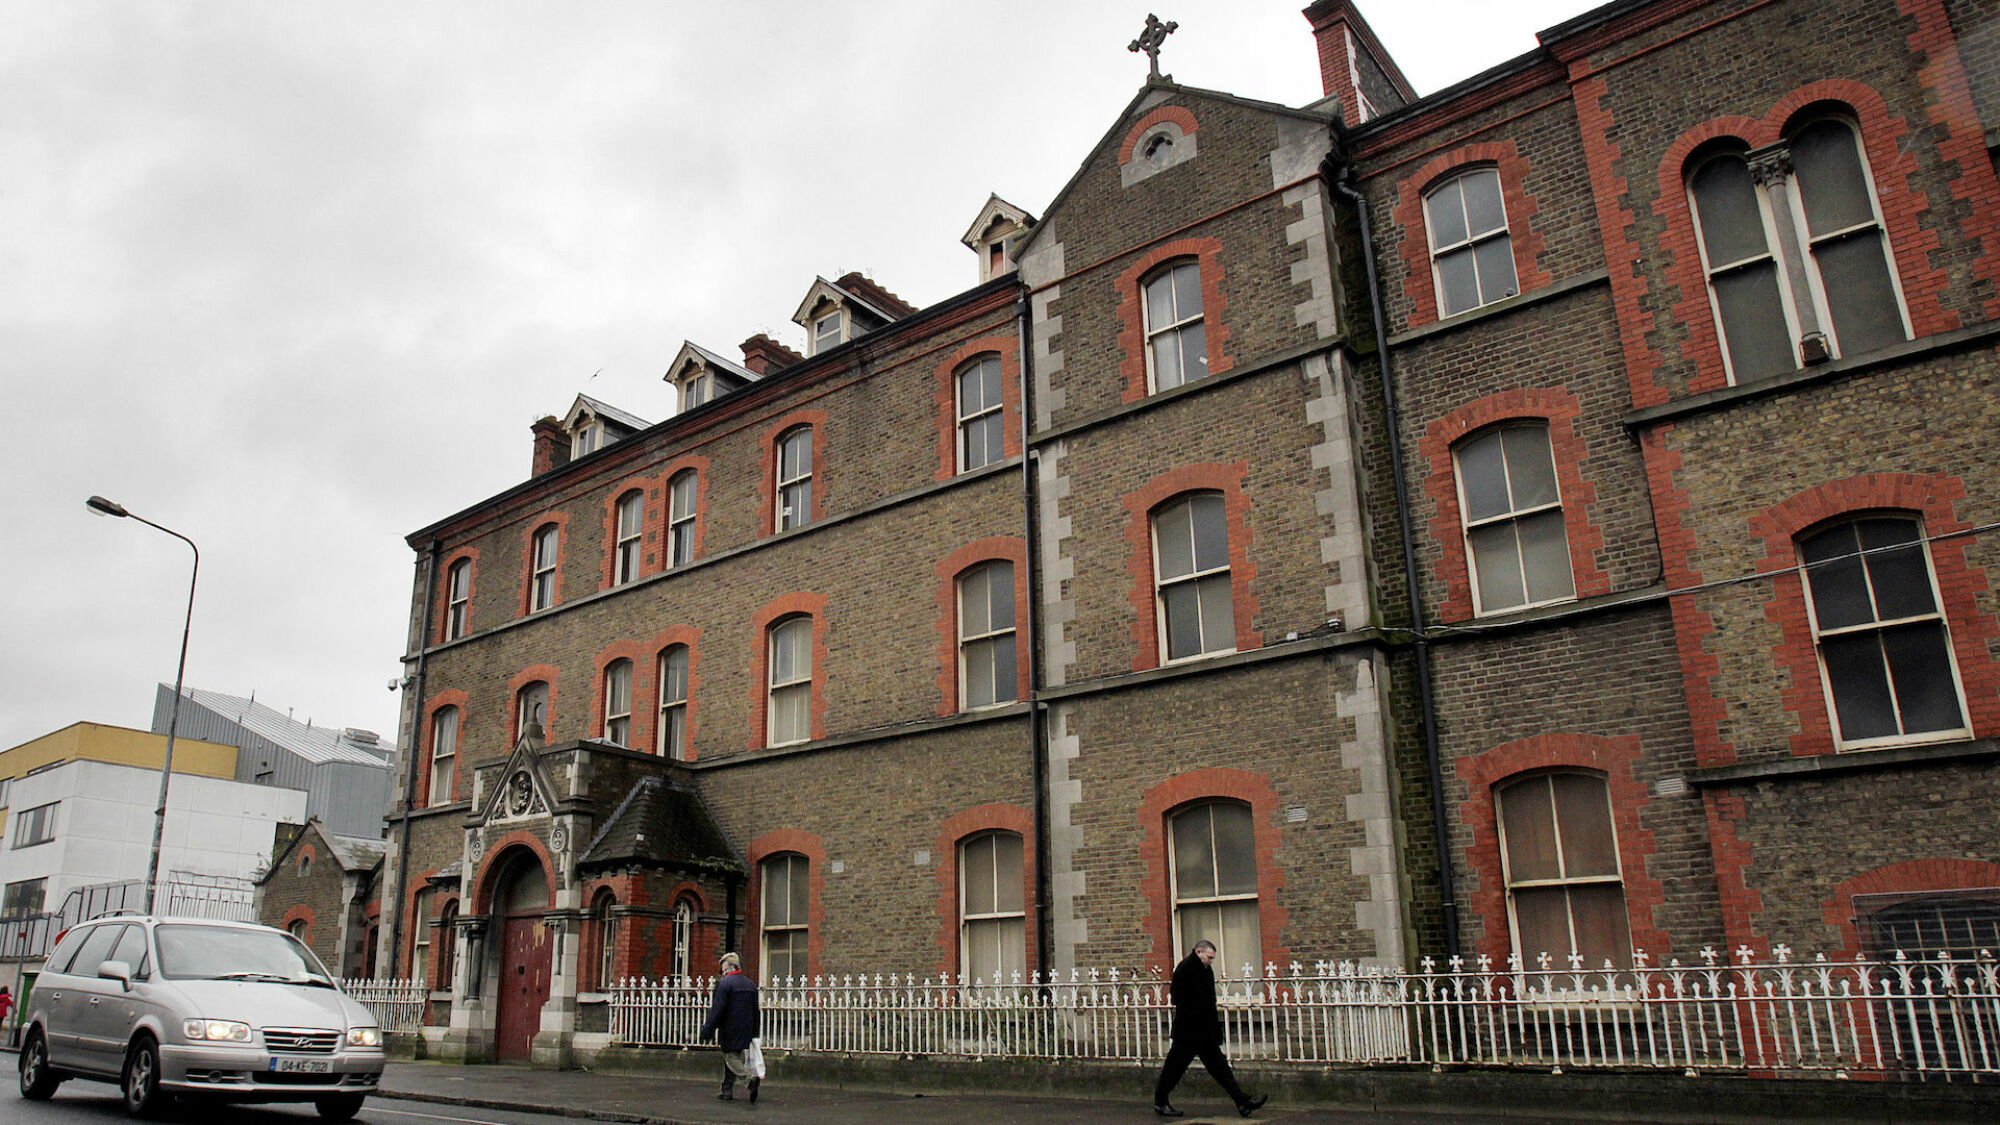 The exterior of the now derelict Sisters of Our Lady of Charity Magdalene Laundry on Sean McDermott St in Dublin.